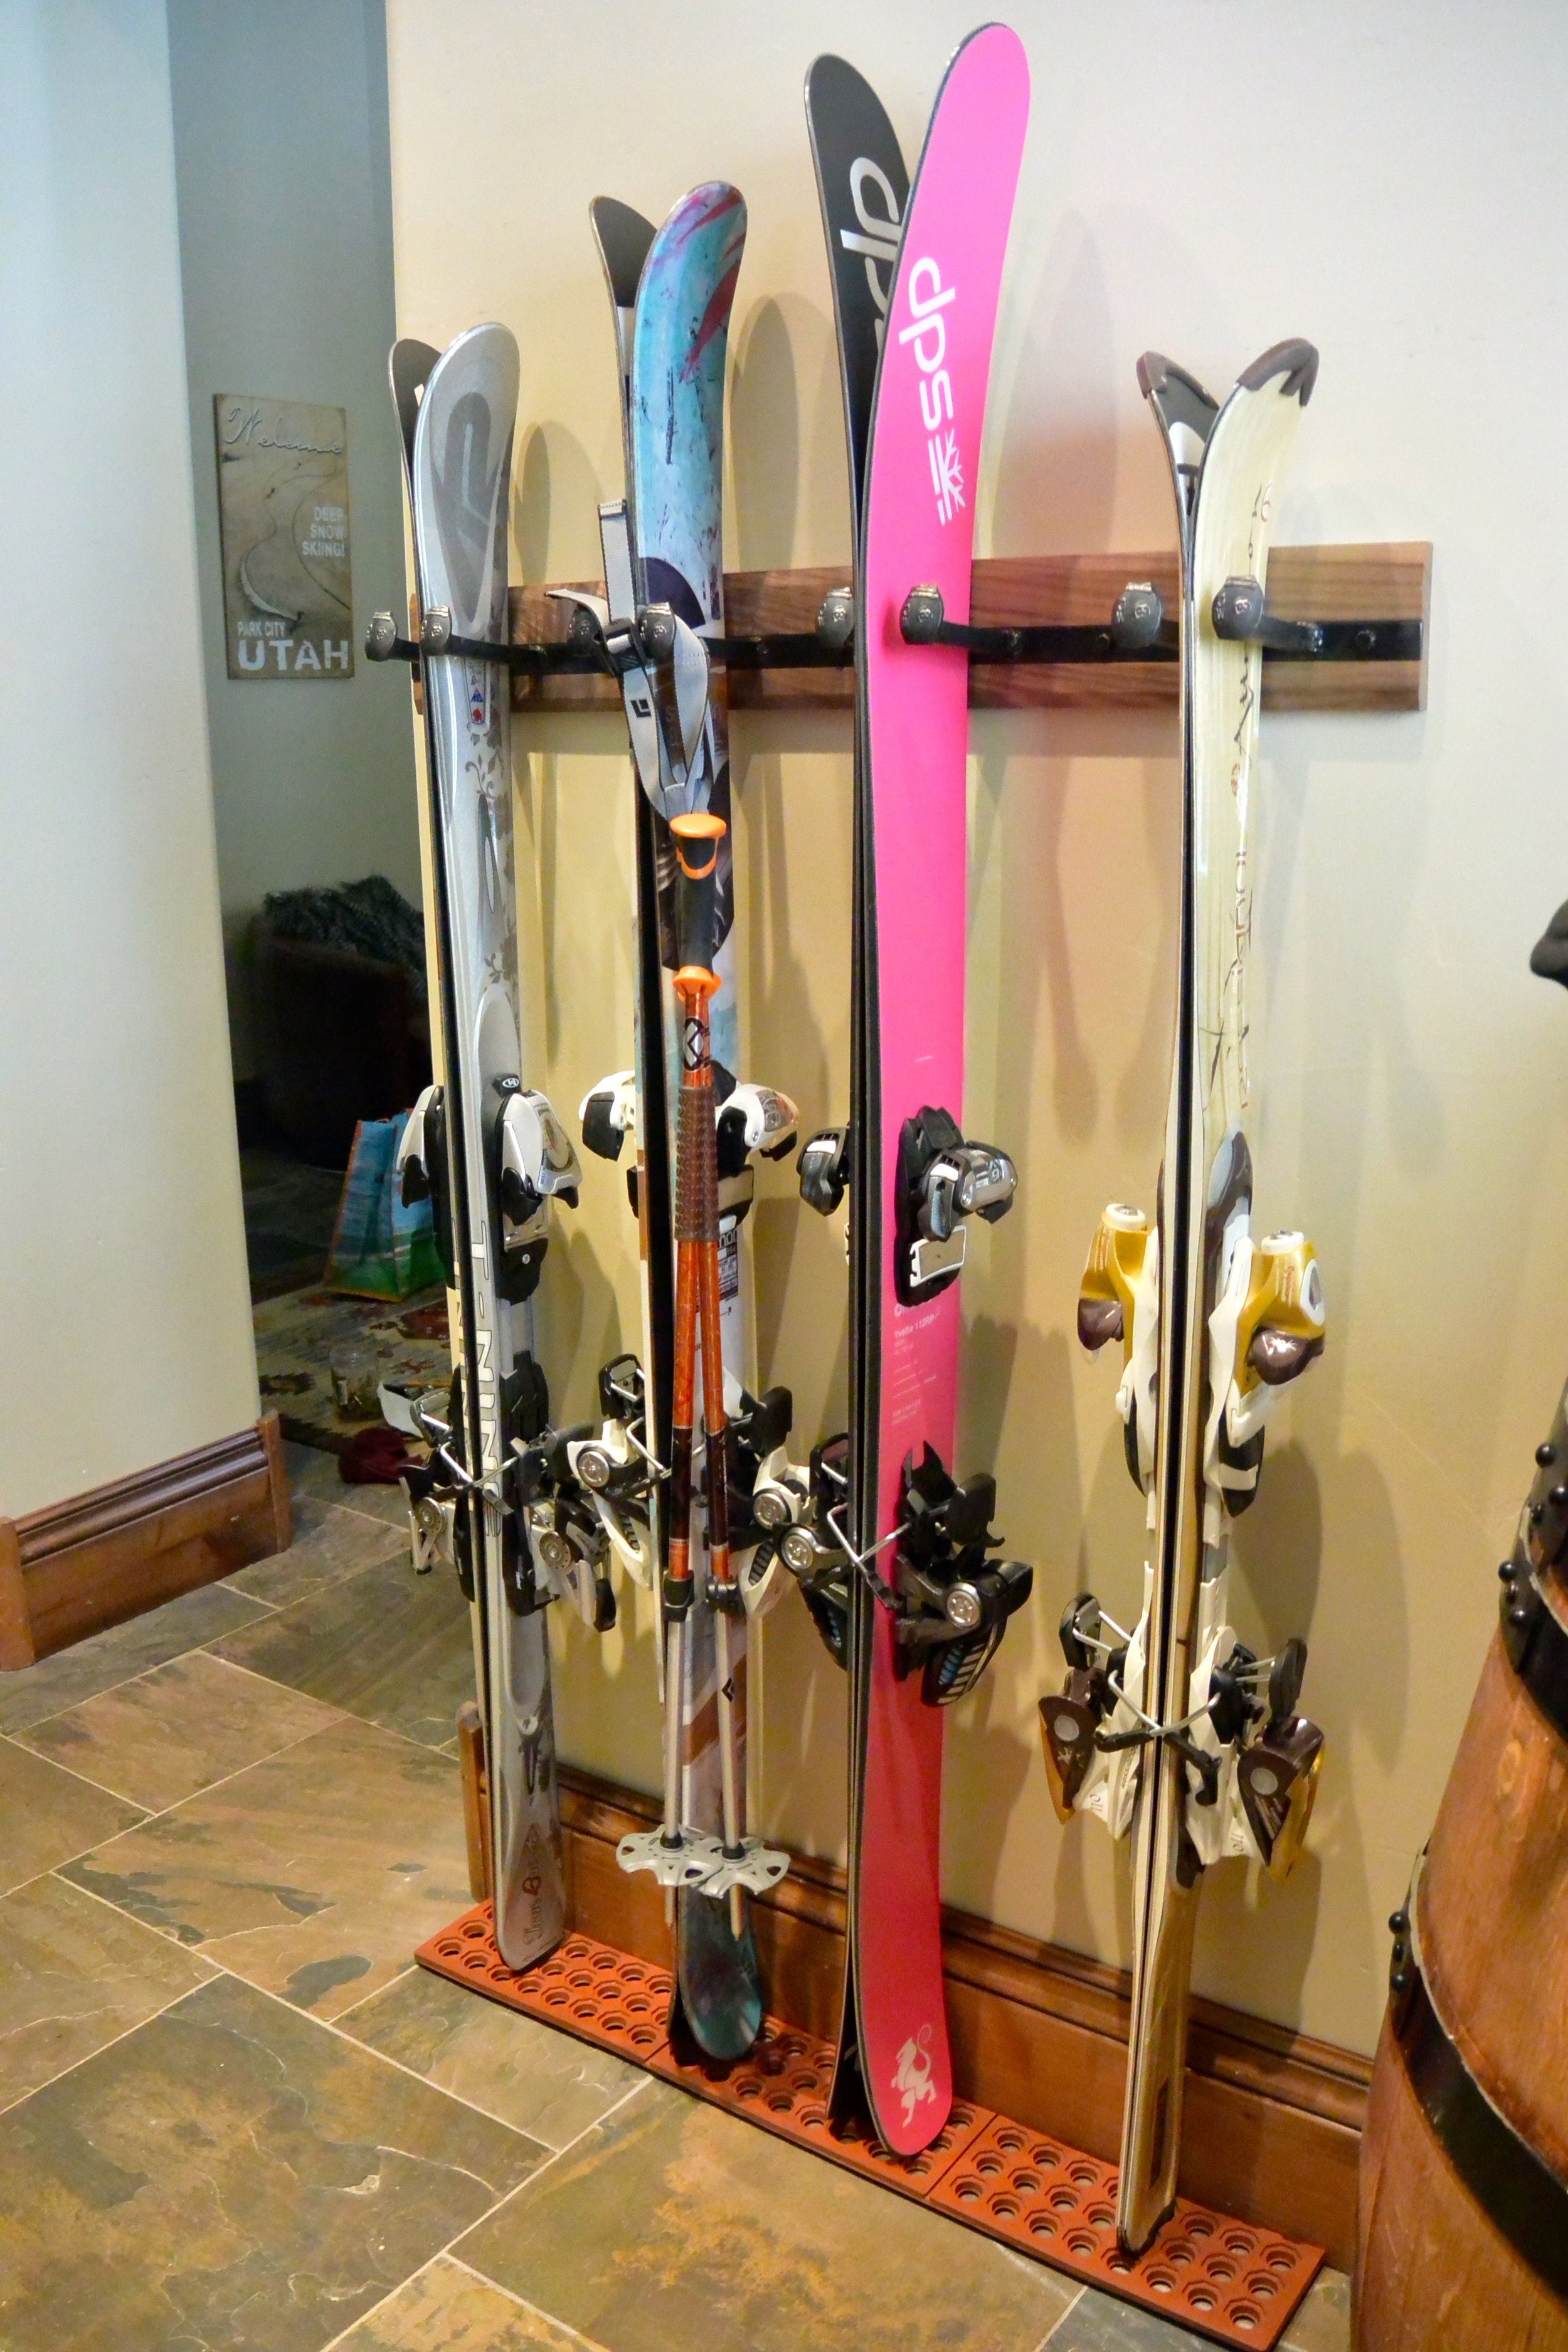  Makes your skis look great and saves room! 